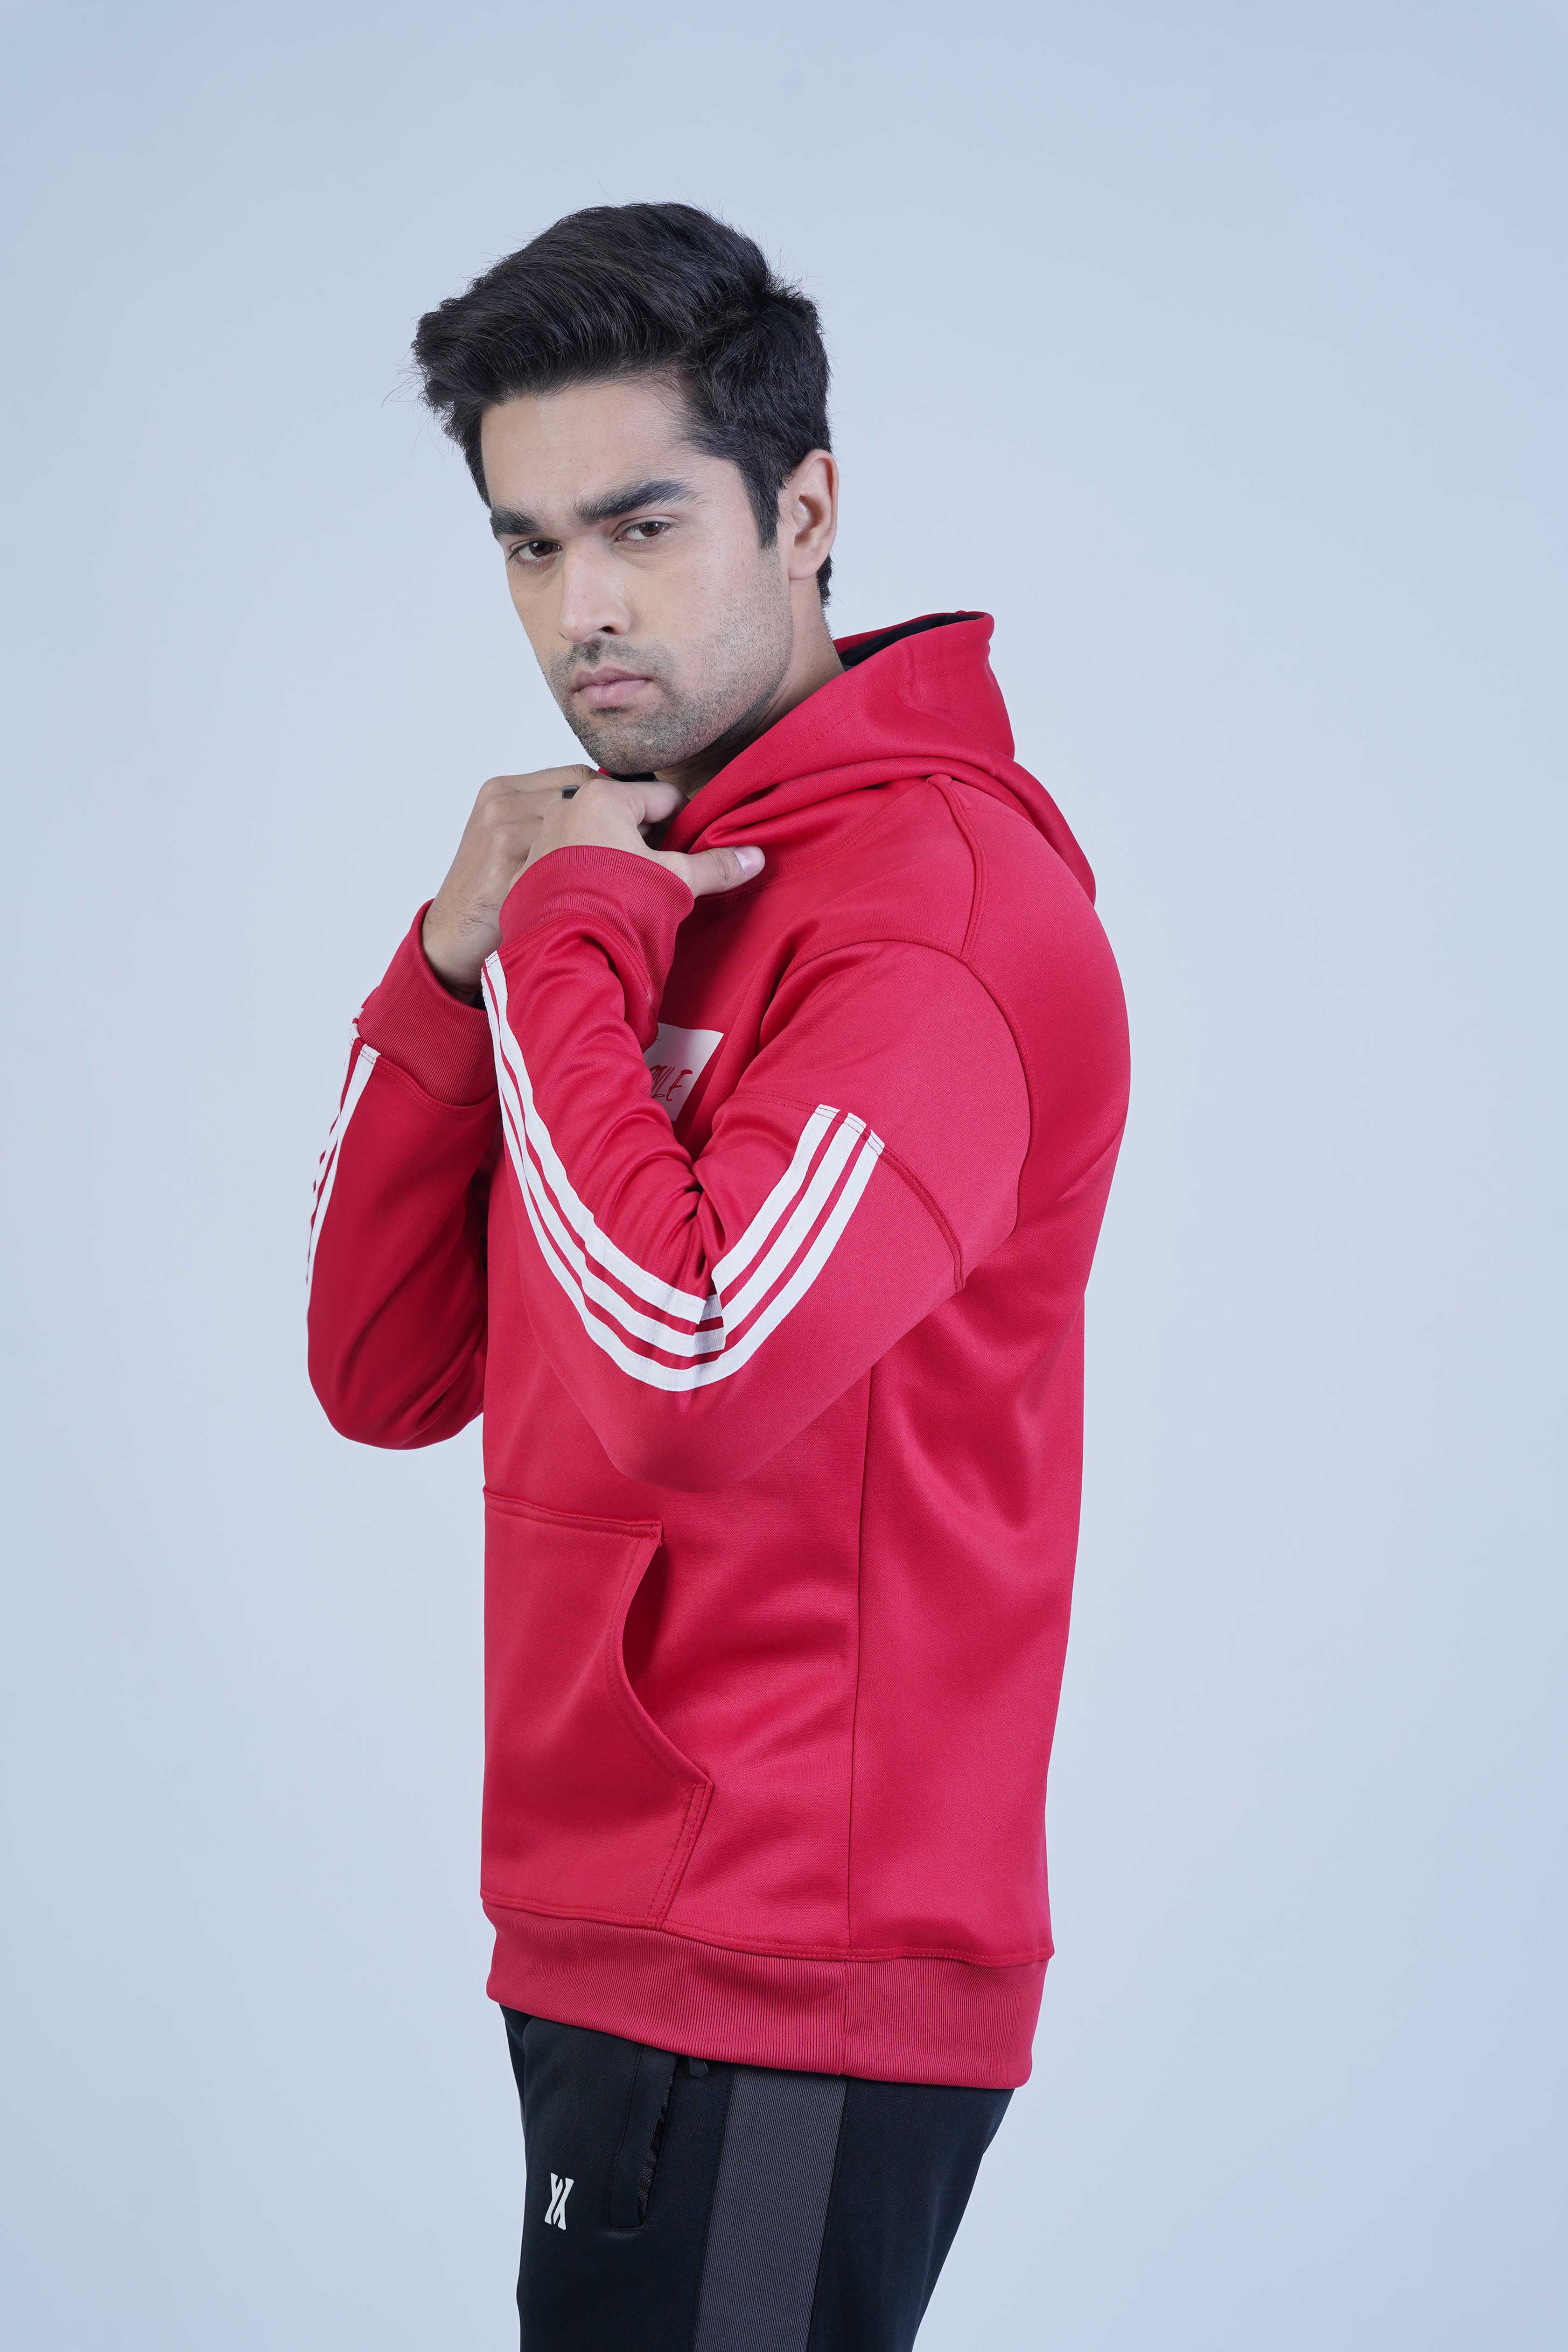 Urban 2.0 Red Hoodie - The Xea Men's Clothing Collection